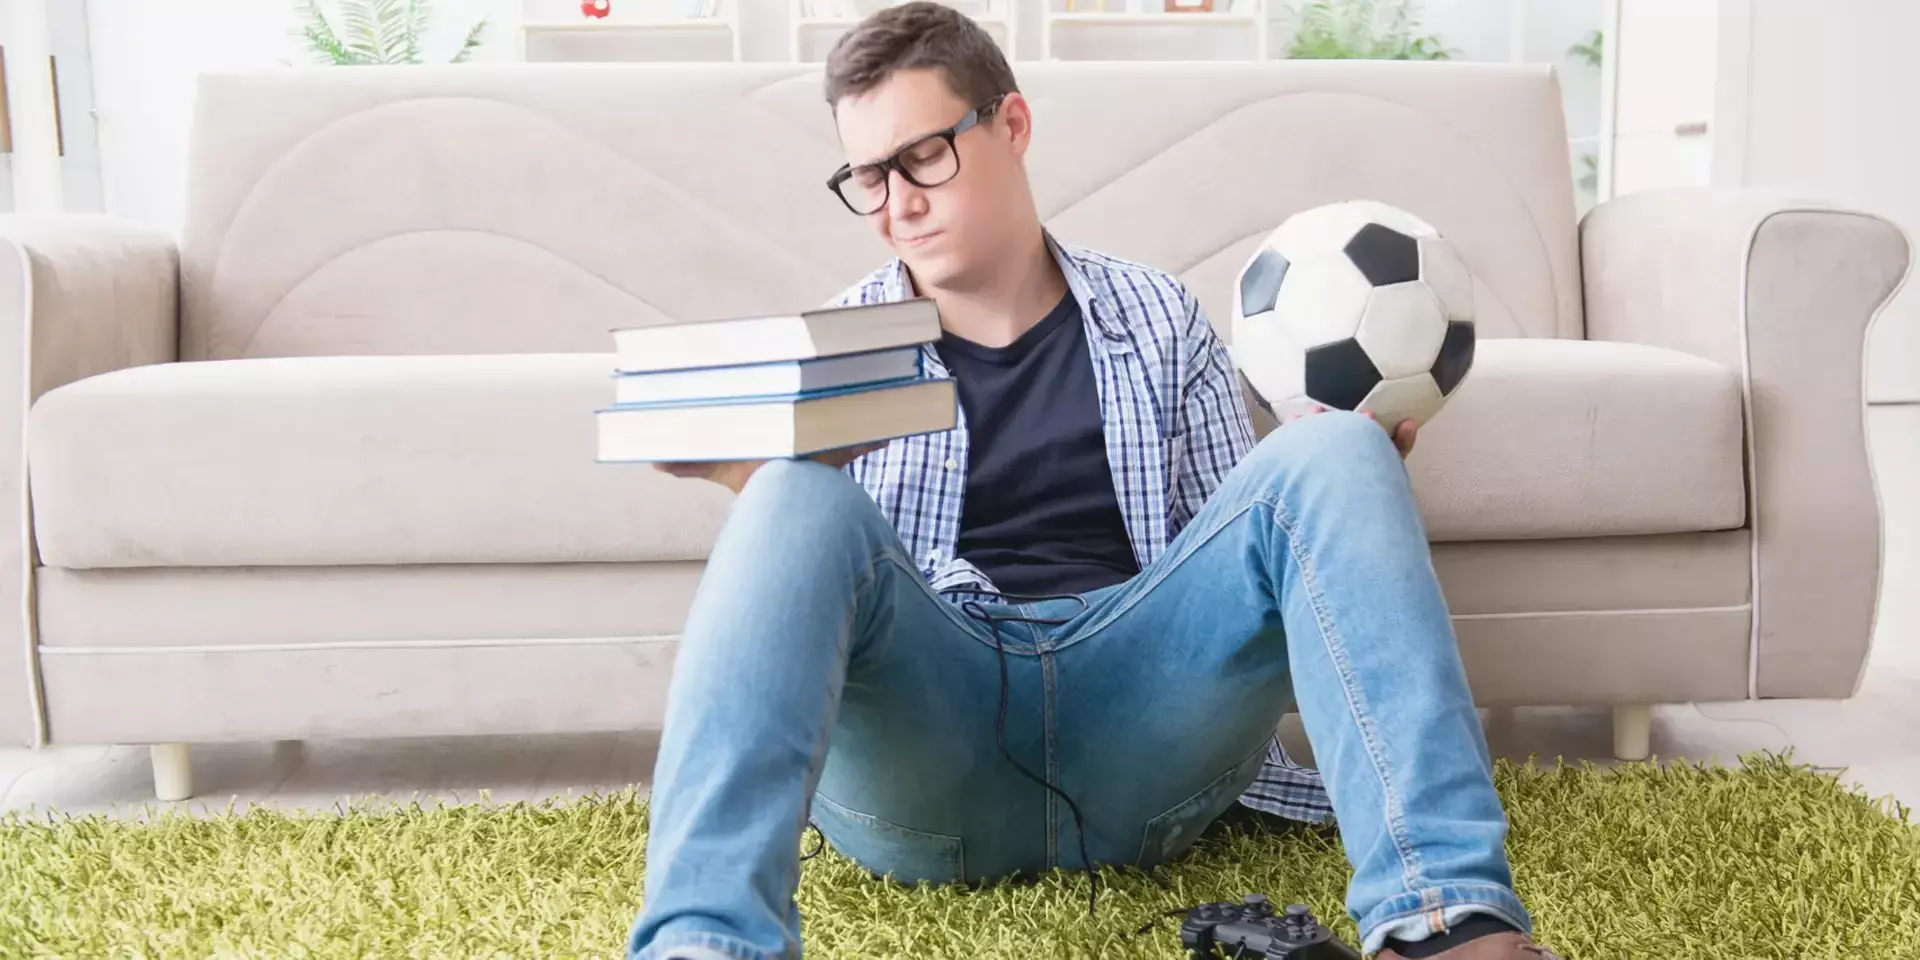 a man sat against a sofa holding a stack of books in one hand and a football in the other